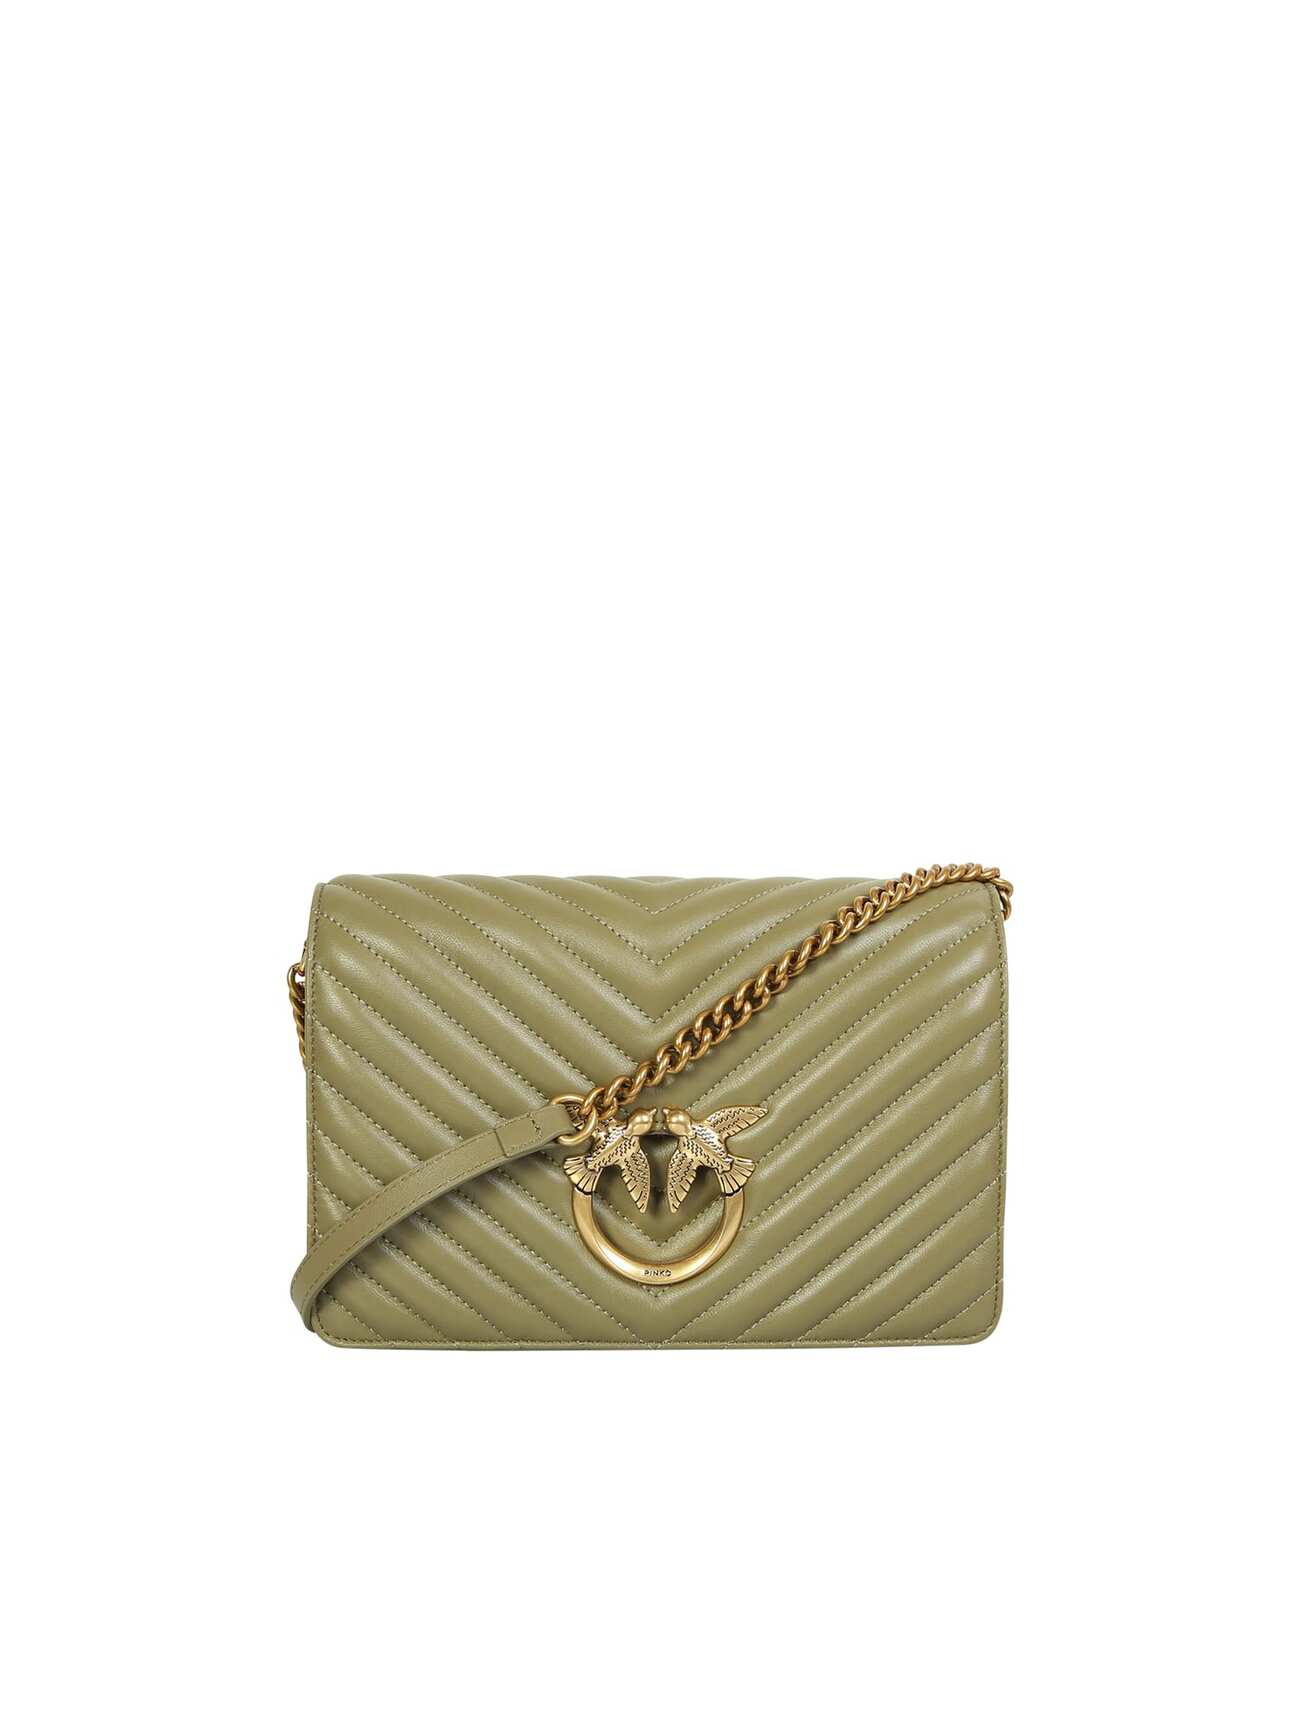 Pinko Love Quilted Crossbody Bag in green